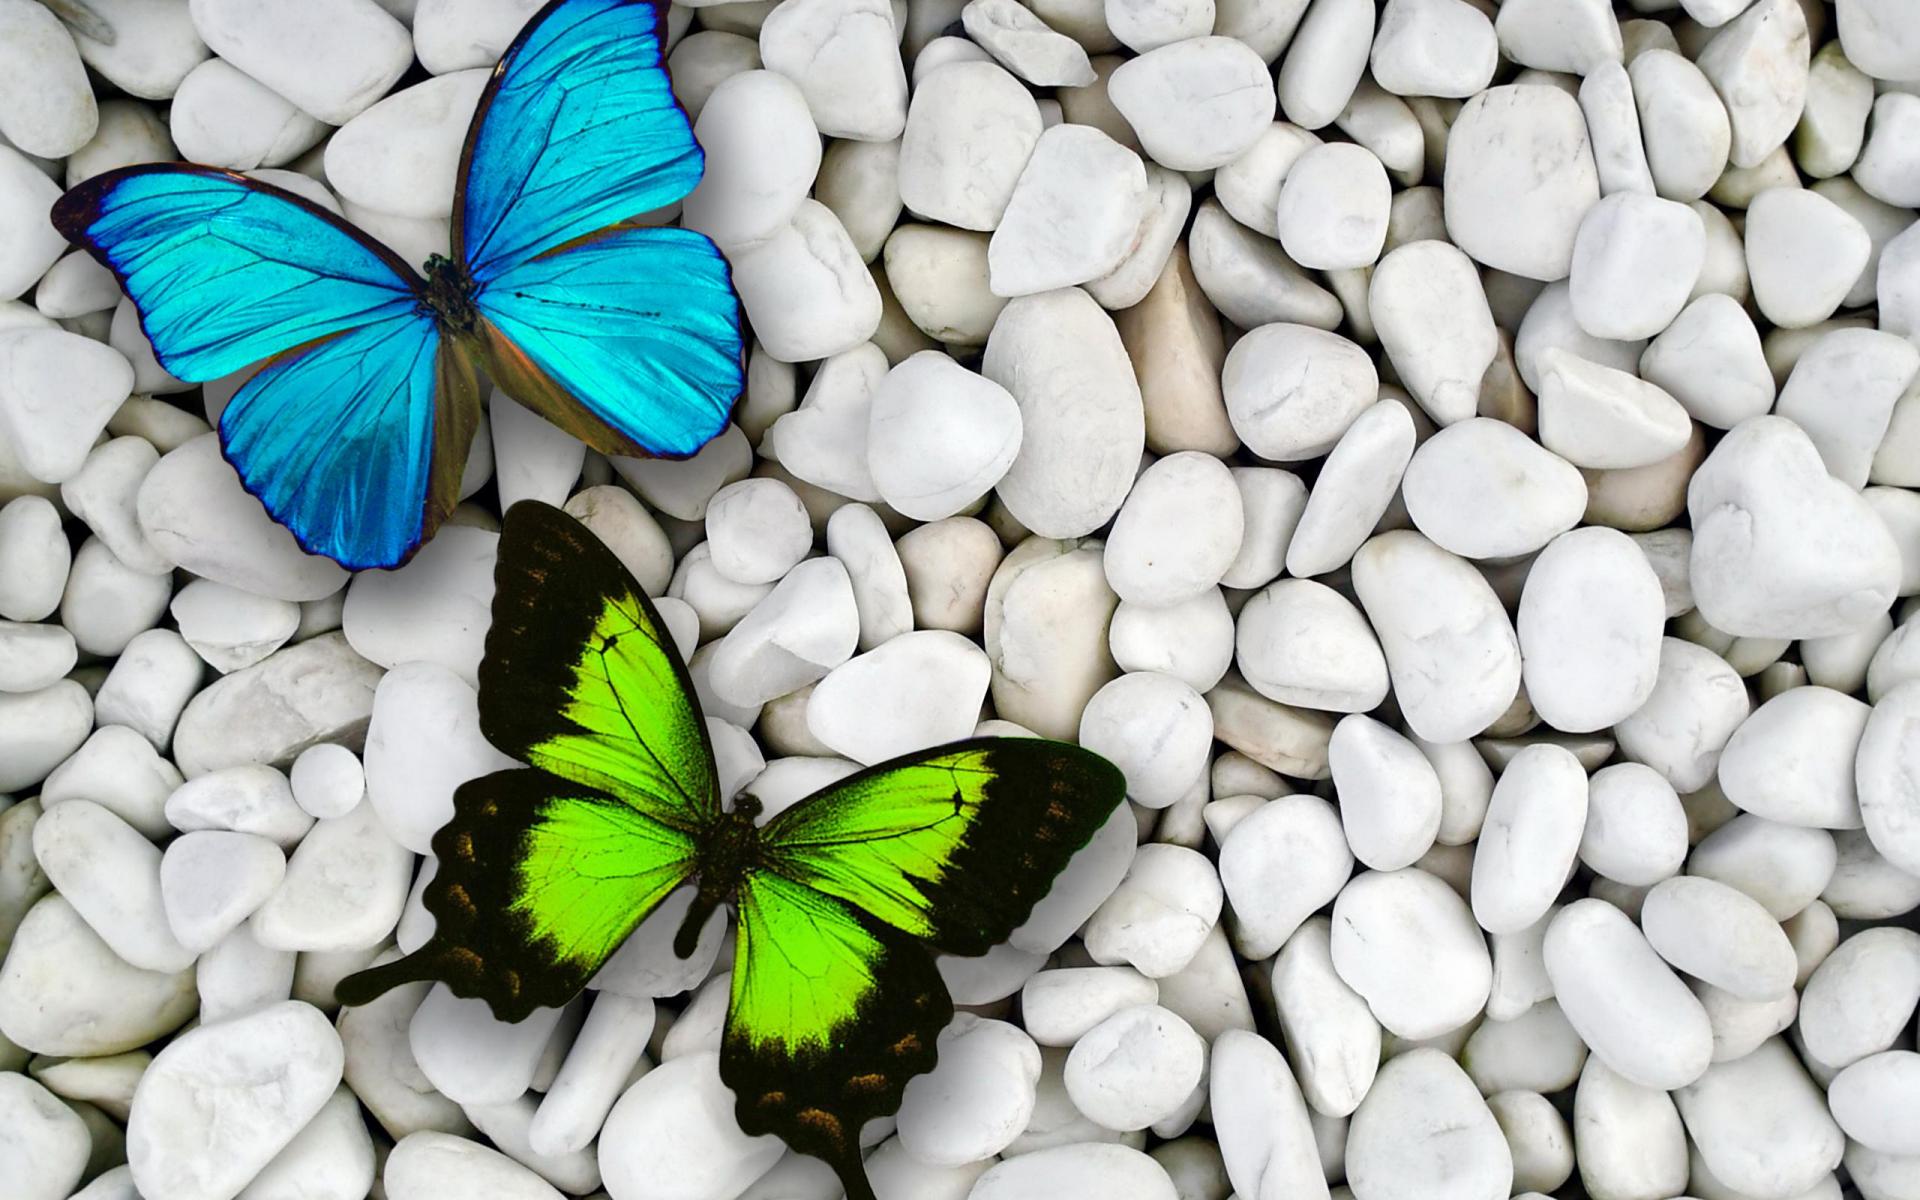 white, green, artistic, butterfly, blue, pebbles, stone